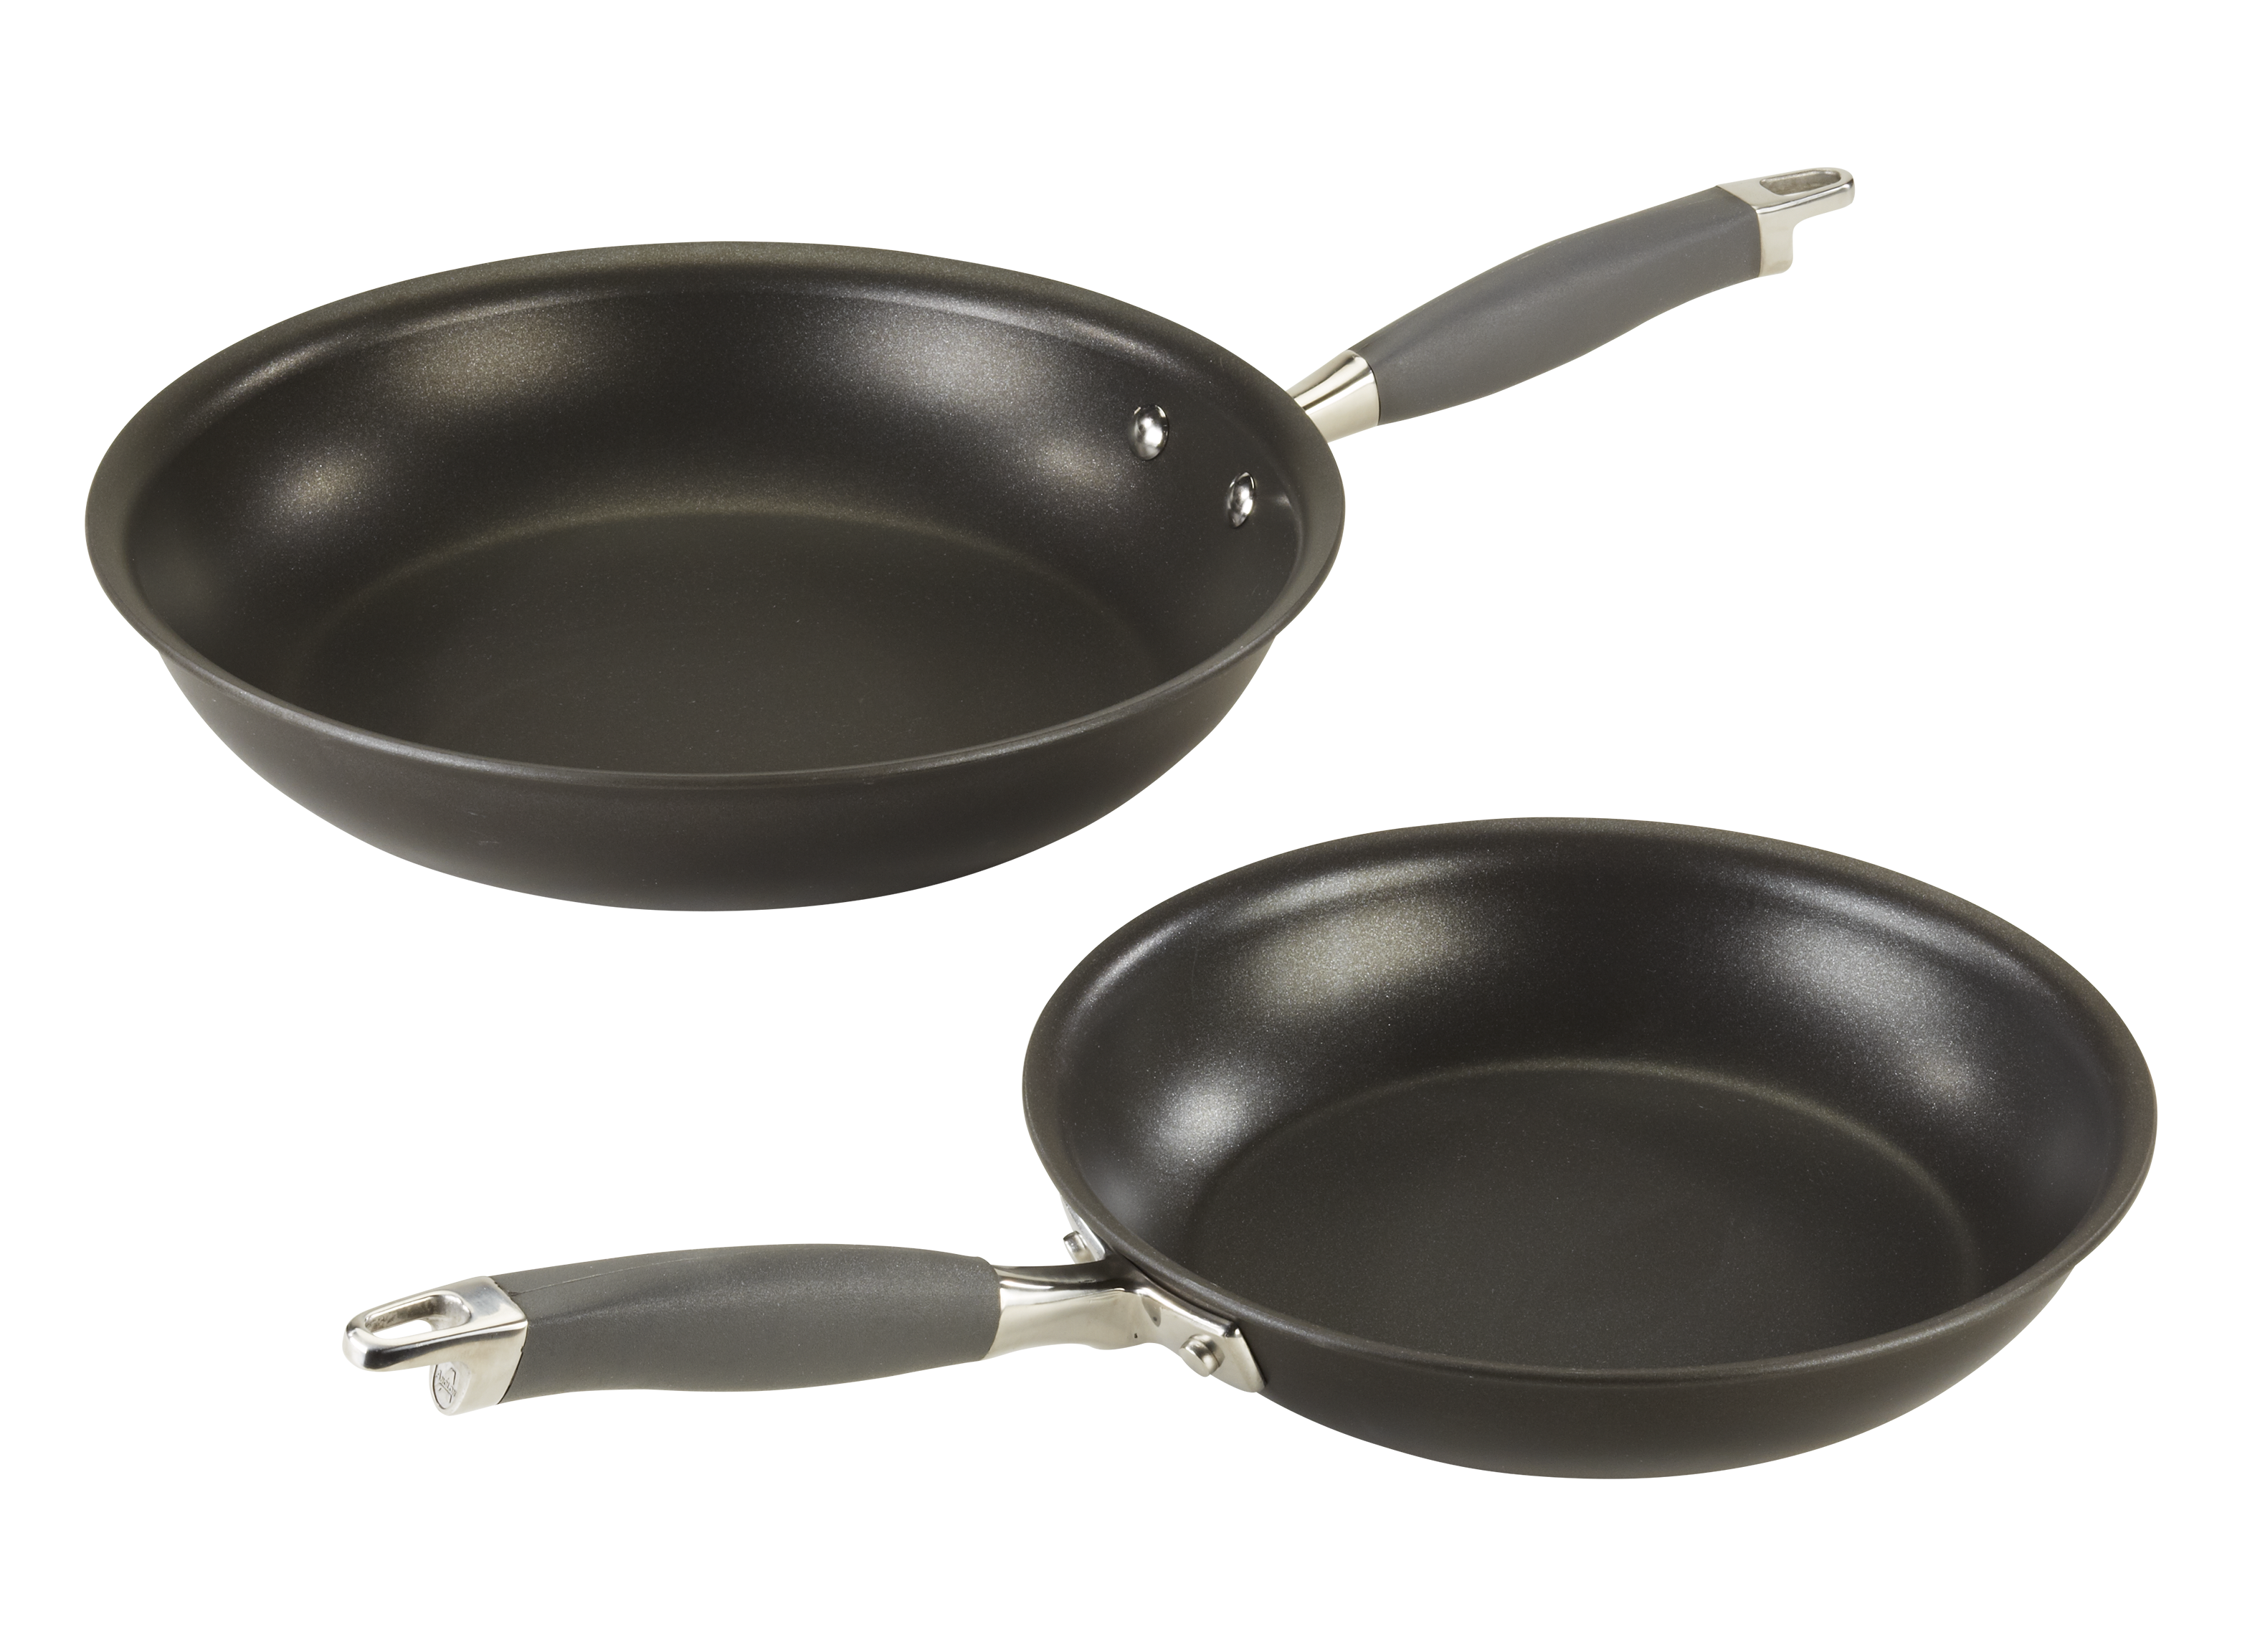 Anolon Advanced Home Frying Pan Set Cookware Review - Consumer Reports